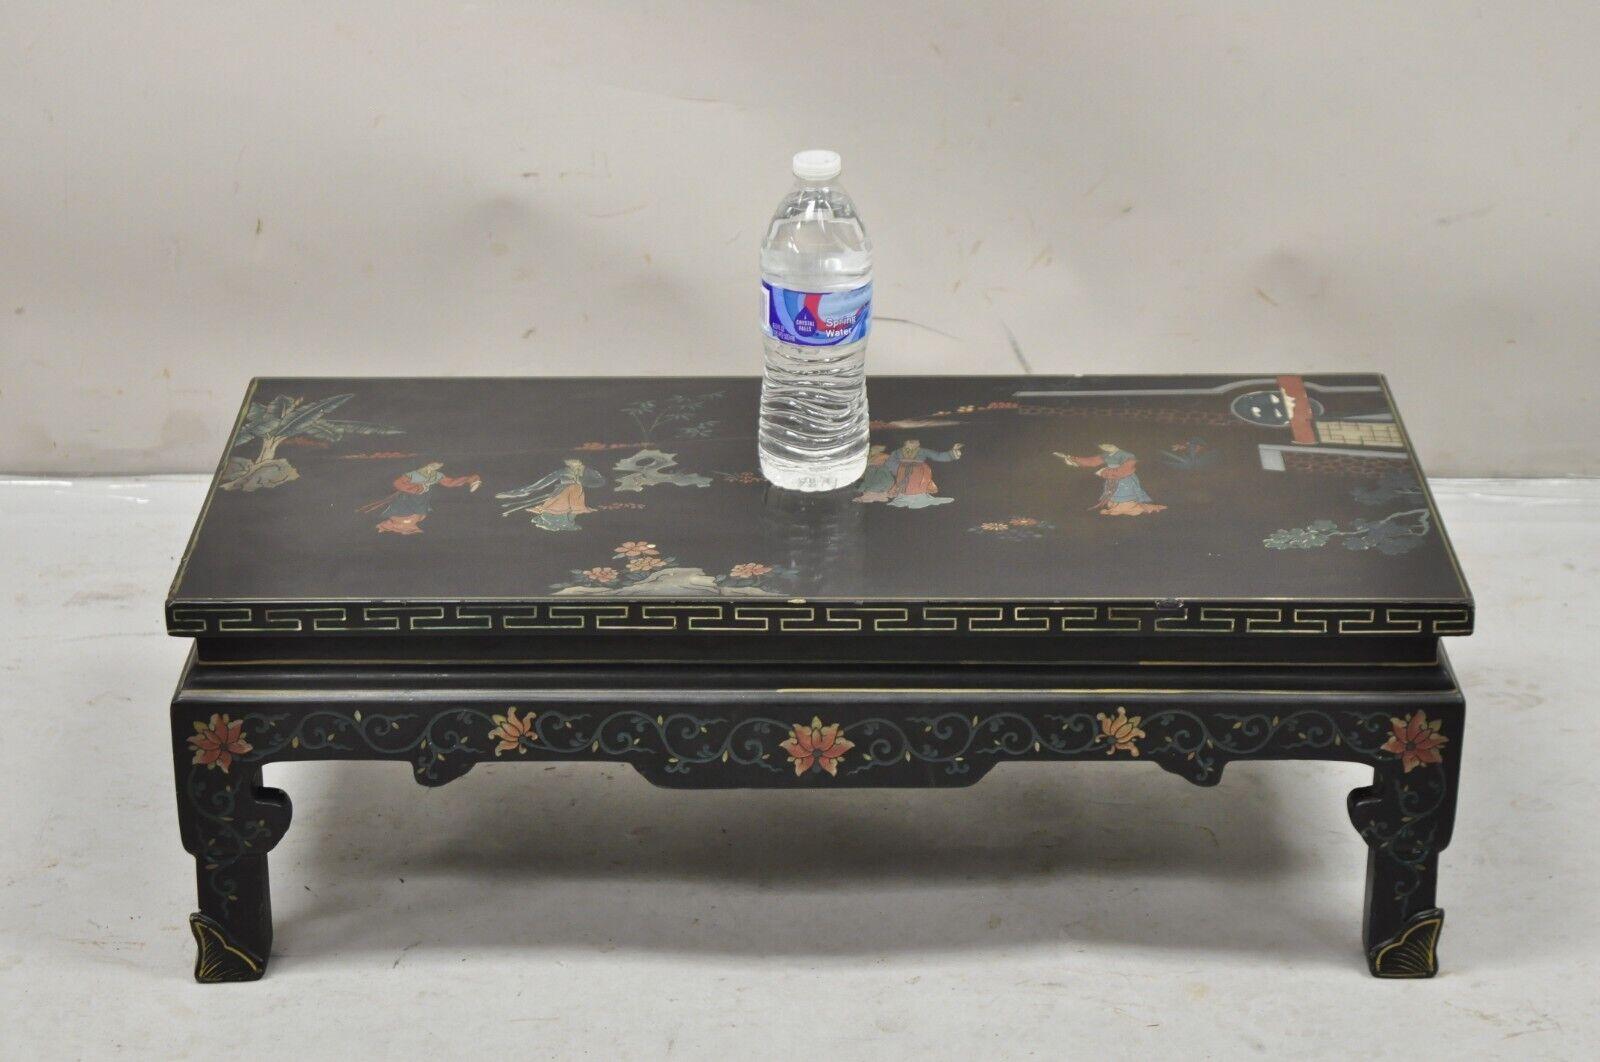 Vintage Chinese Oriental Black Lacquer Hand Painted Low Asian Side Table. Item features nice low form, carved and hand painted scenes with women, very nice vintage item. Circa Mid 20th Century. Measurements: 9.5